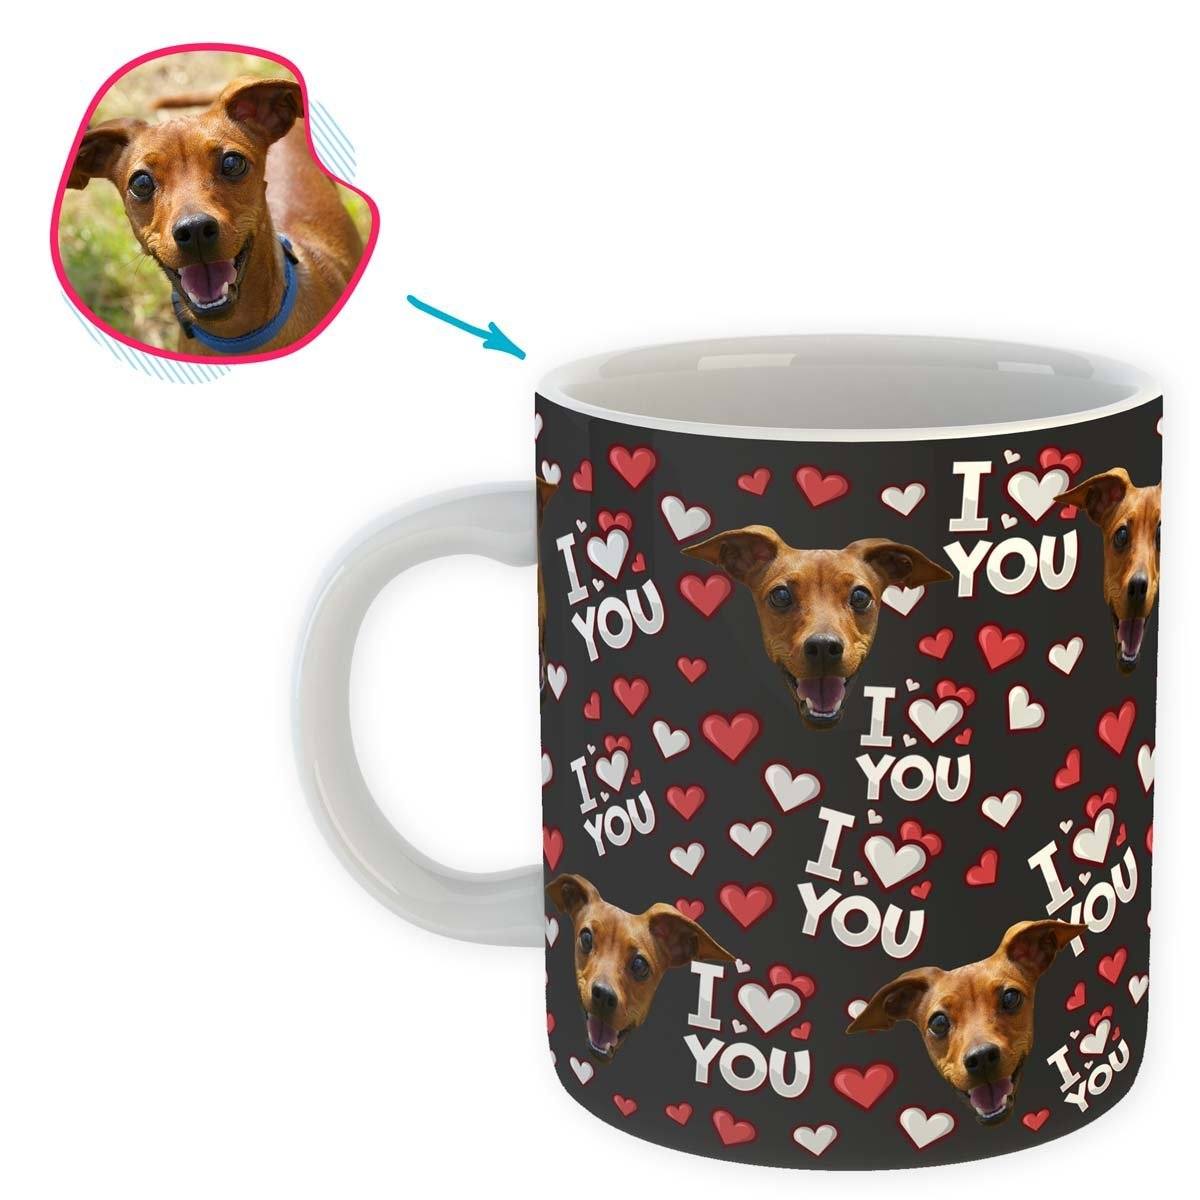 dark I Love You mug personalized with photo of face printed on it